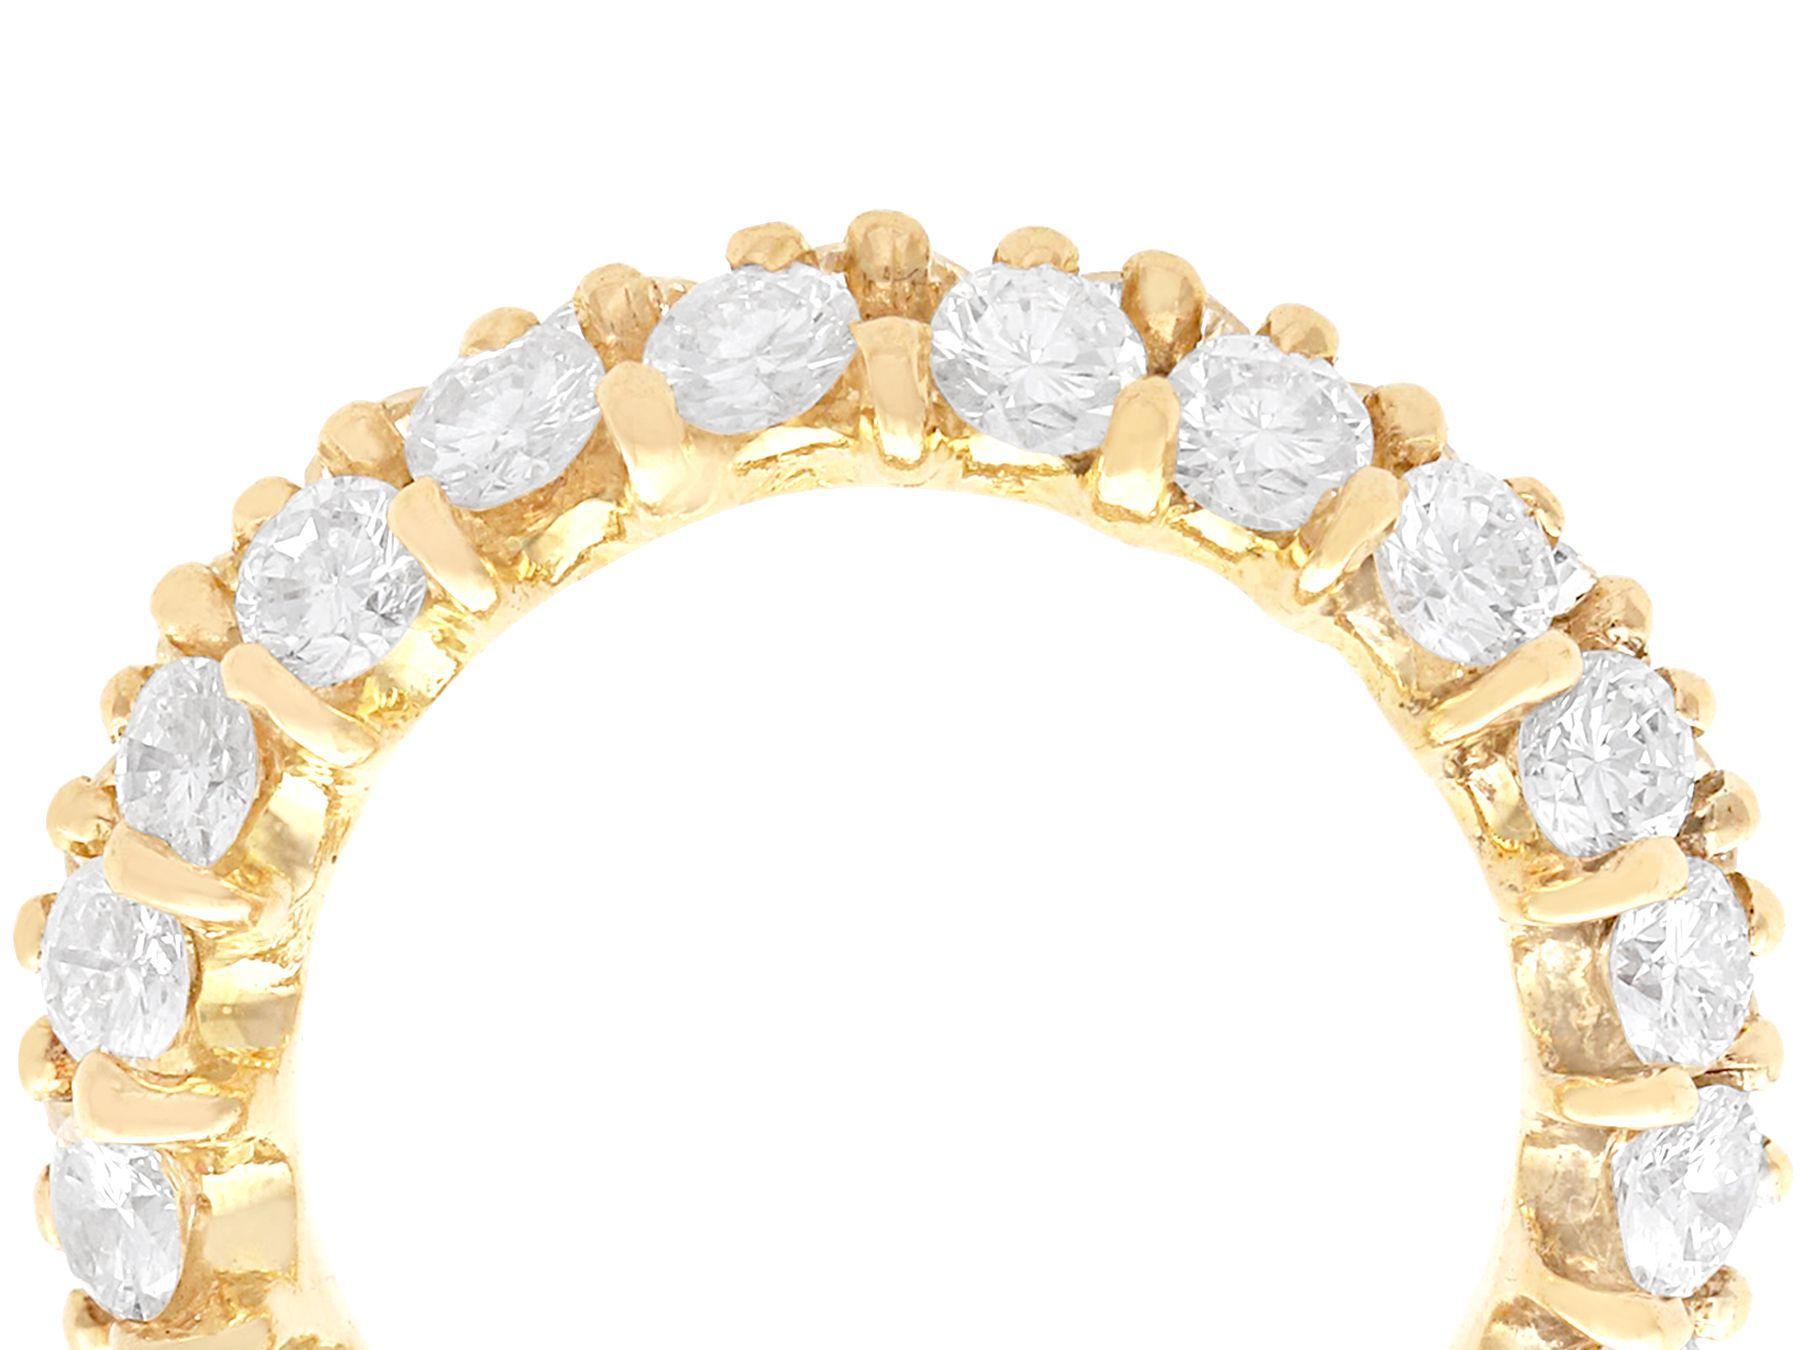 A stunning, fine and impressive 2.28 carats diamond double row eternity ring in 18 carat yellow gold; part of our diverse vintage diamond ring collections

This stunning, fine and impressive vintage diamond eternity ring has been crafted in 18ct